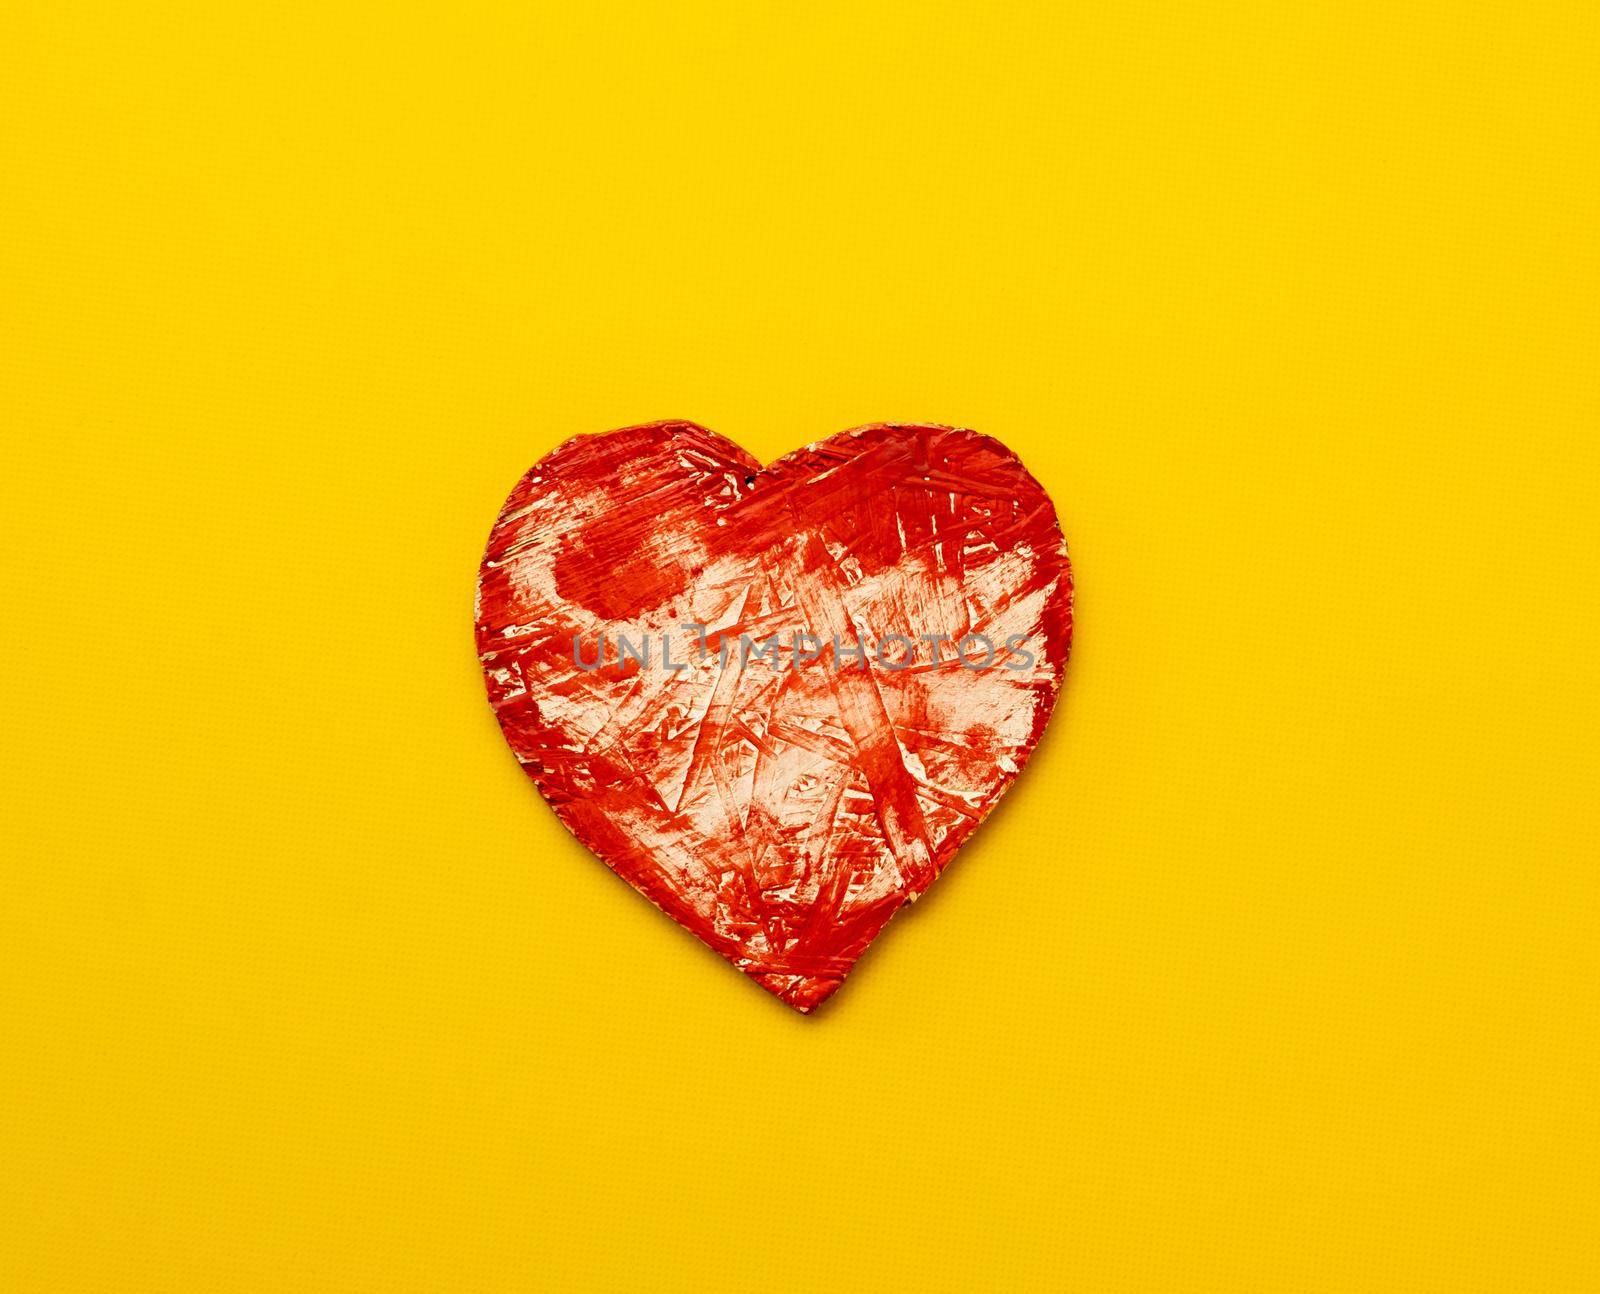 Red heart isolated on yellow background with copy space. Concept of love and feelings. Abstract symbol of passion and affection